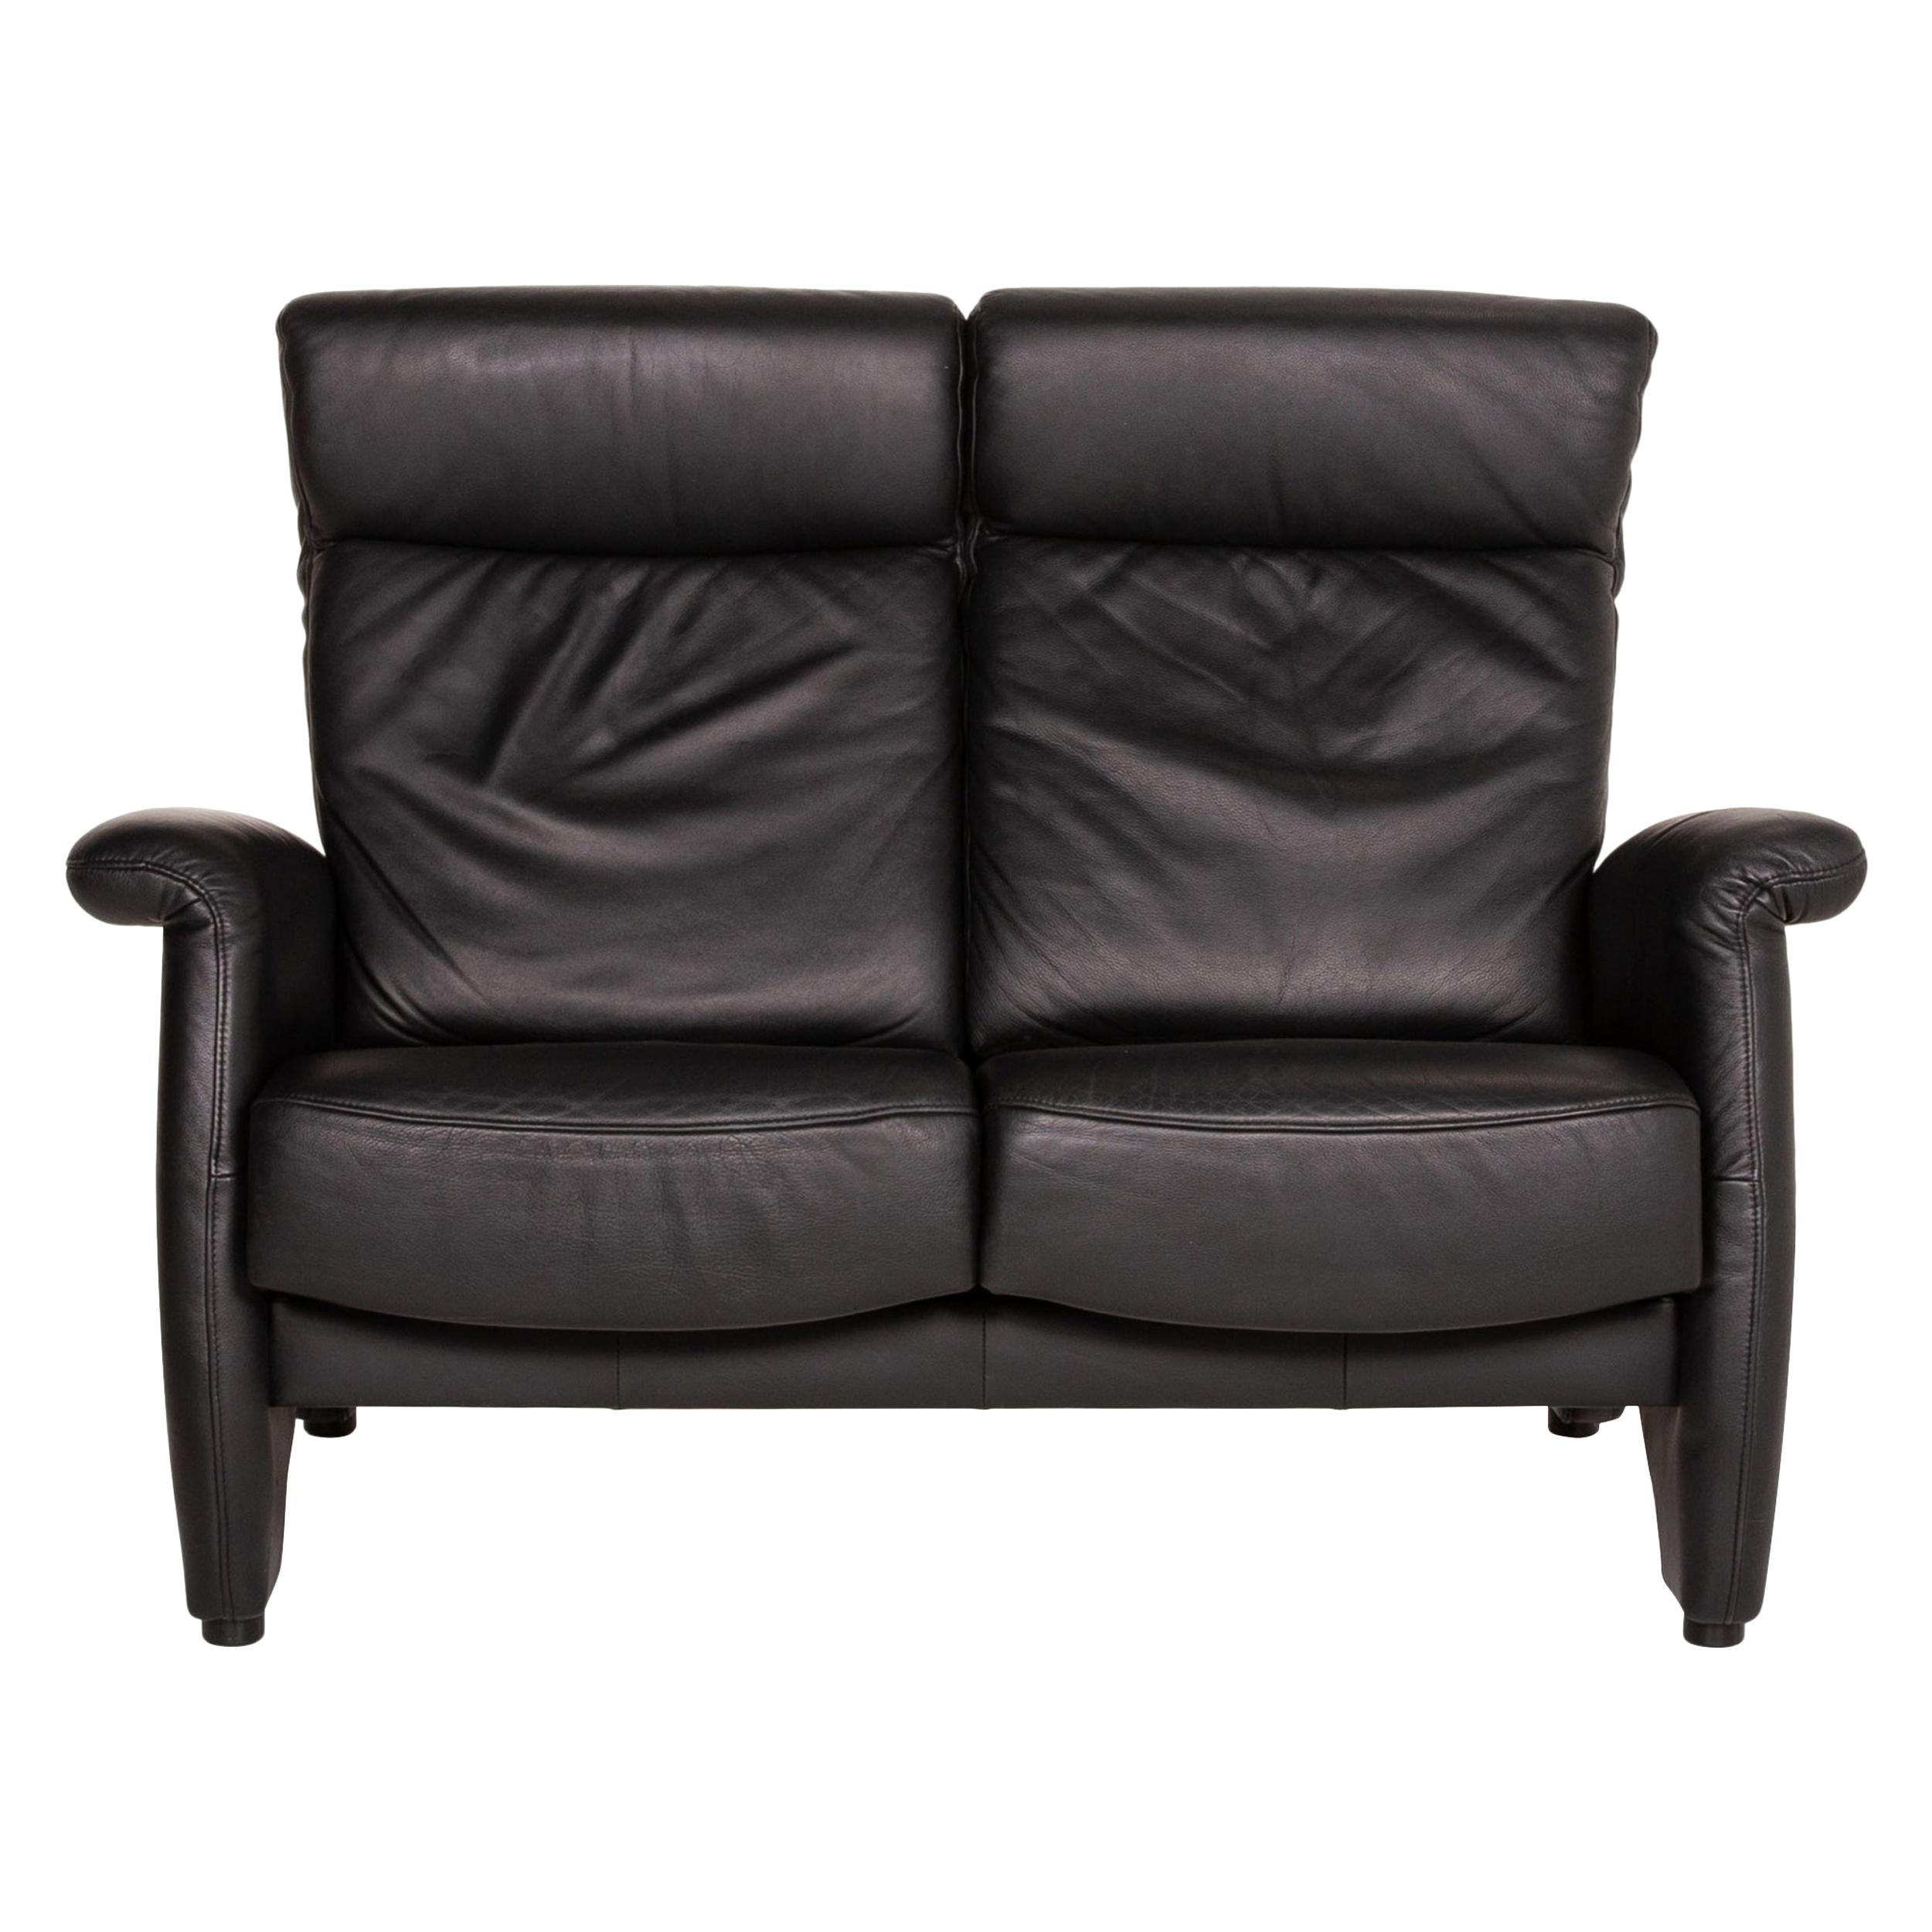 Himolla Ergoline Leather Sofa Black Two-Seater Function Couch For Sale